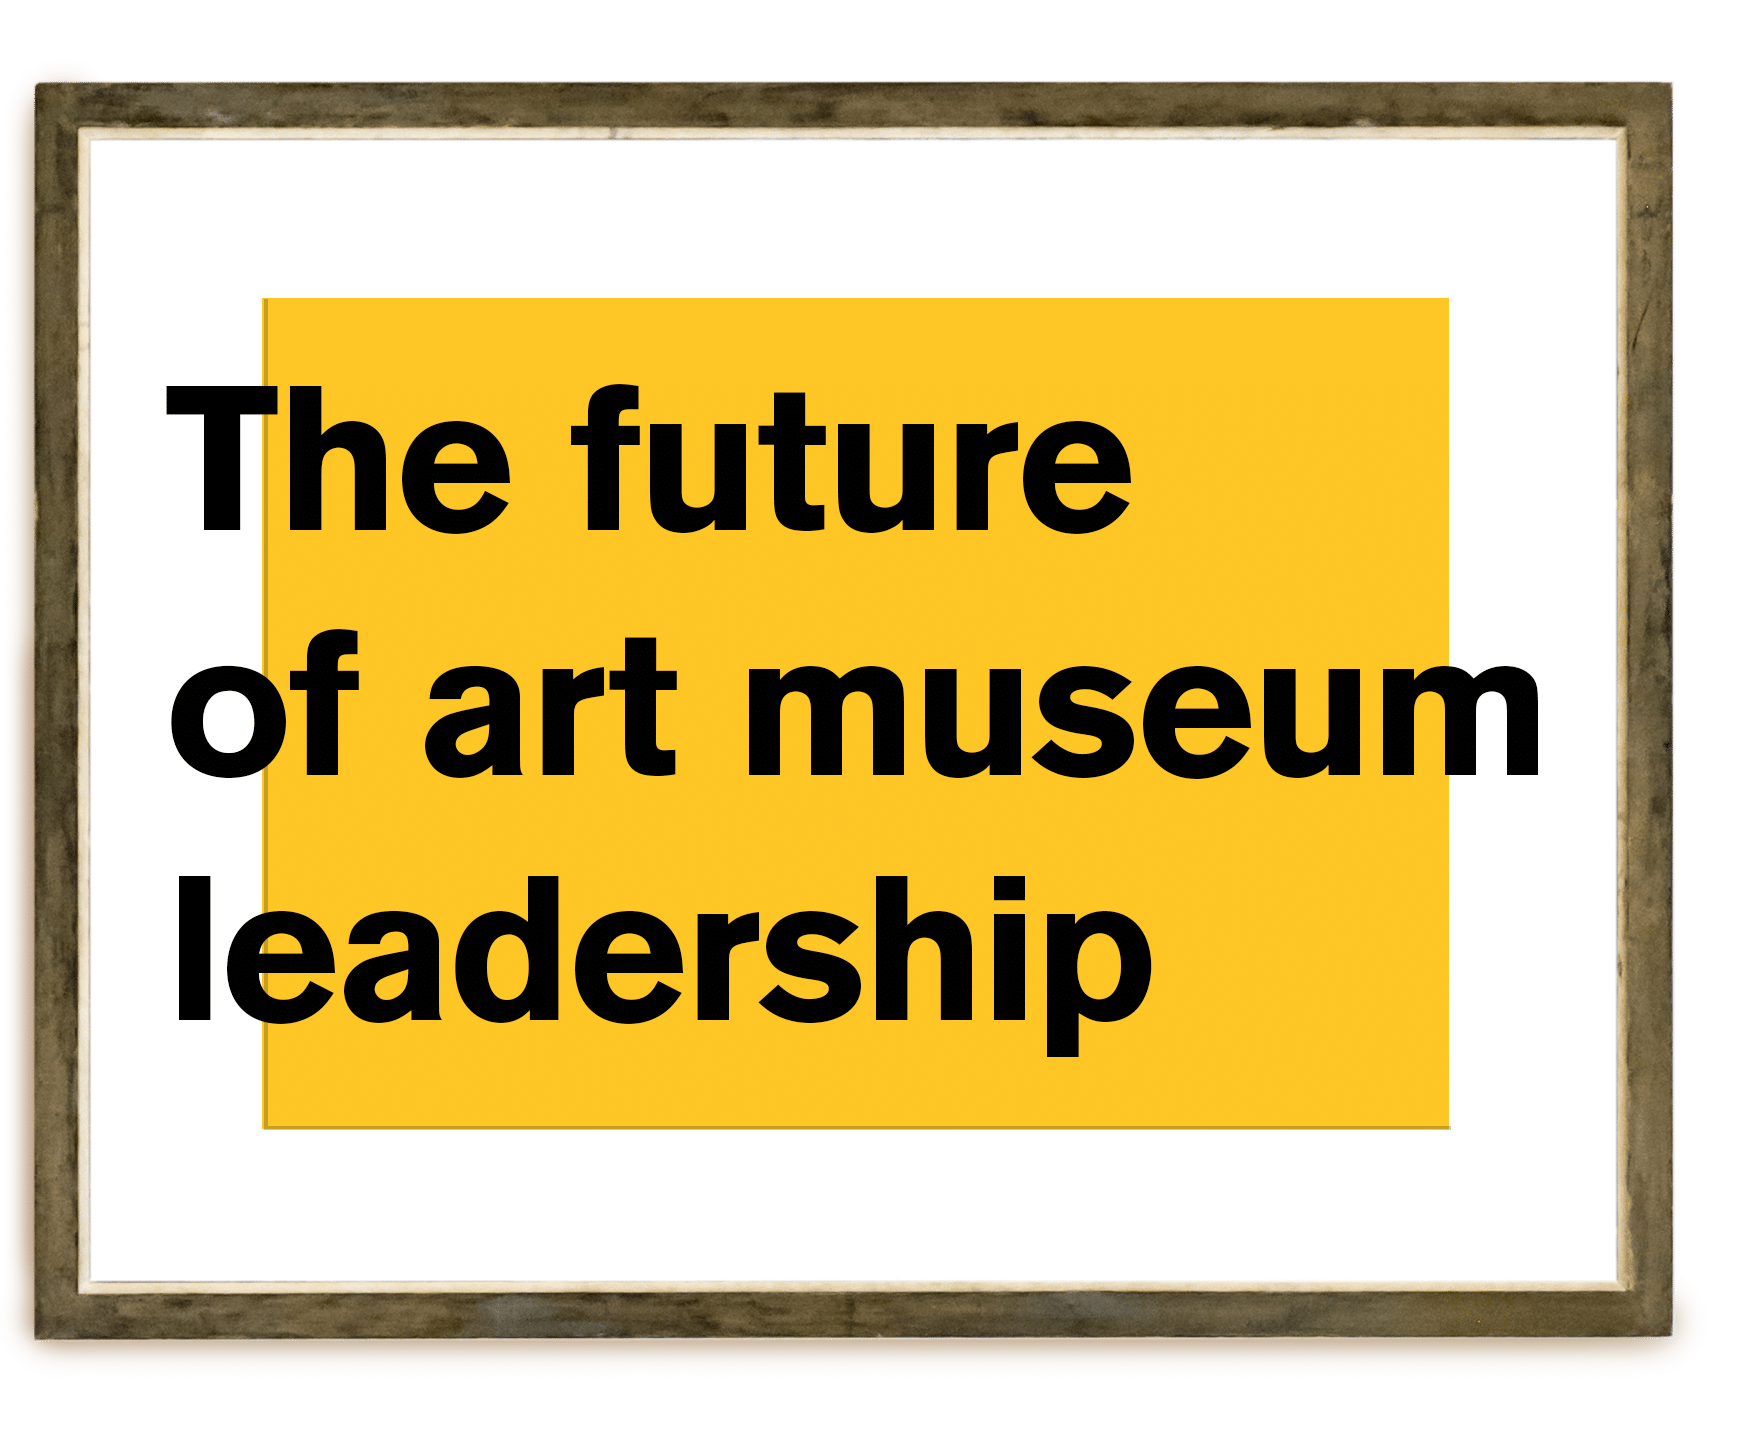 'The future of art museum leadership' - text inside a picture frame